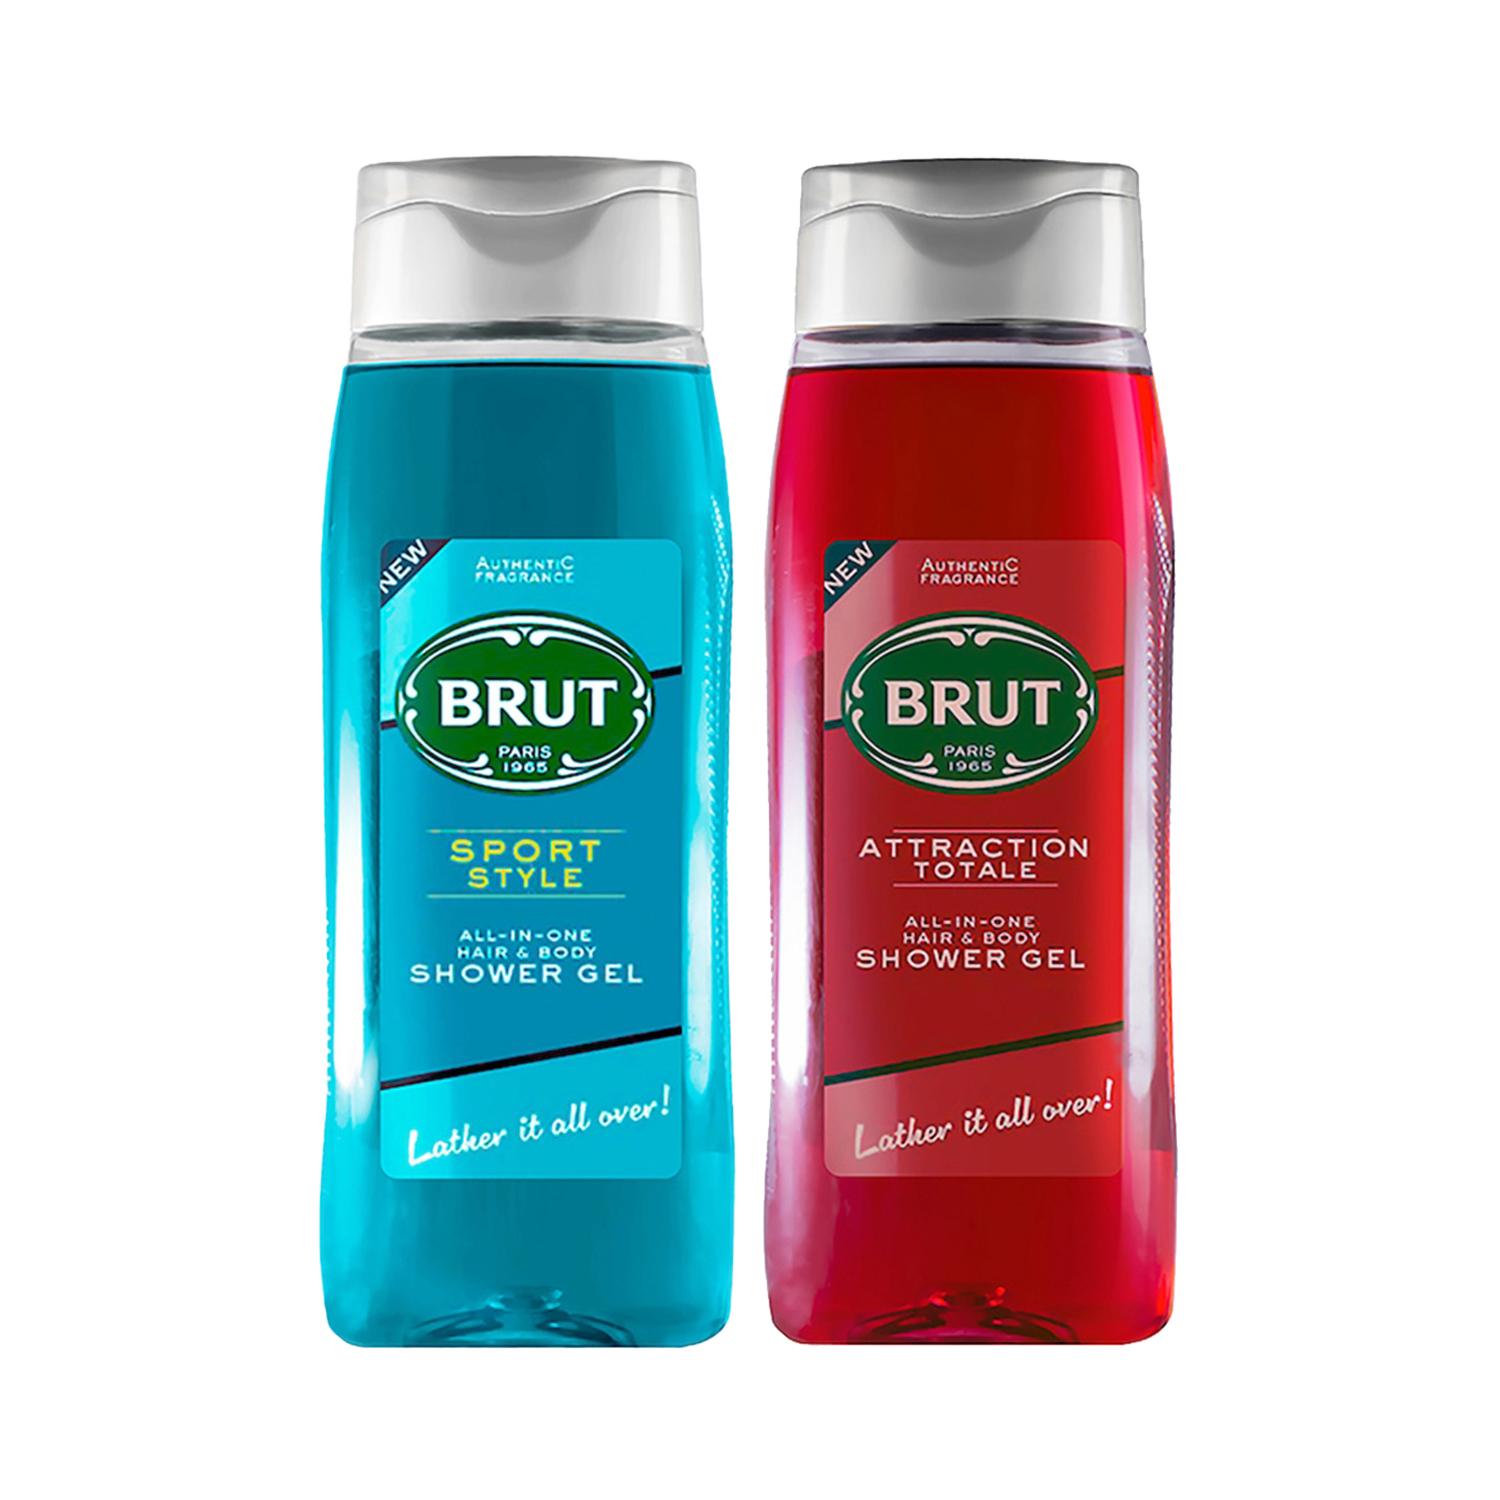 Brut | Brut Sport Style (500ml) & Attraction Total (500ml) All-In-One Hair And Body Shower Gel Combo